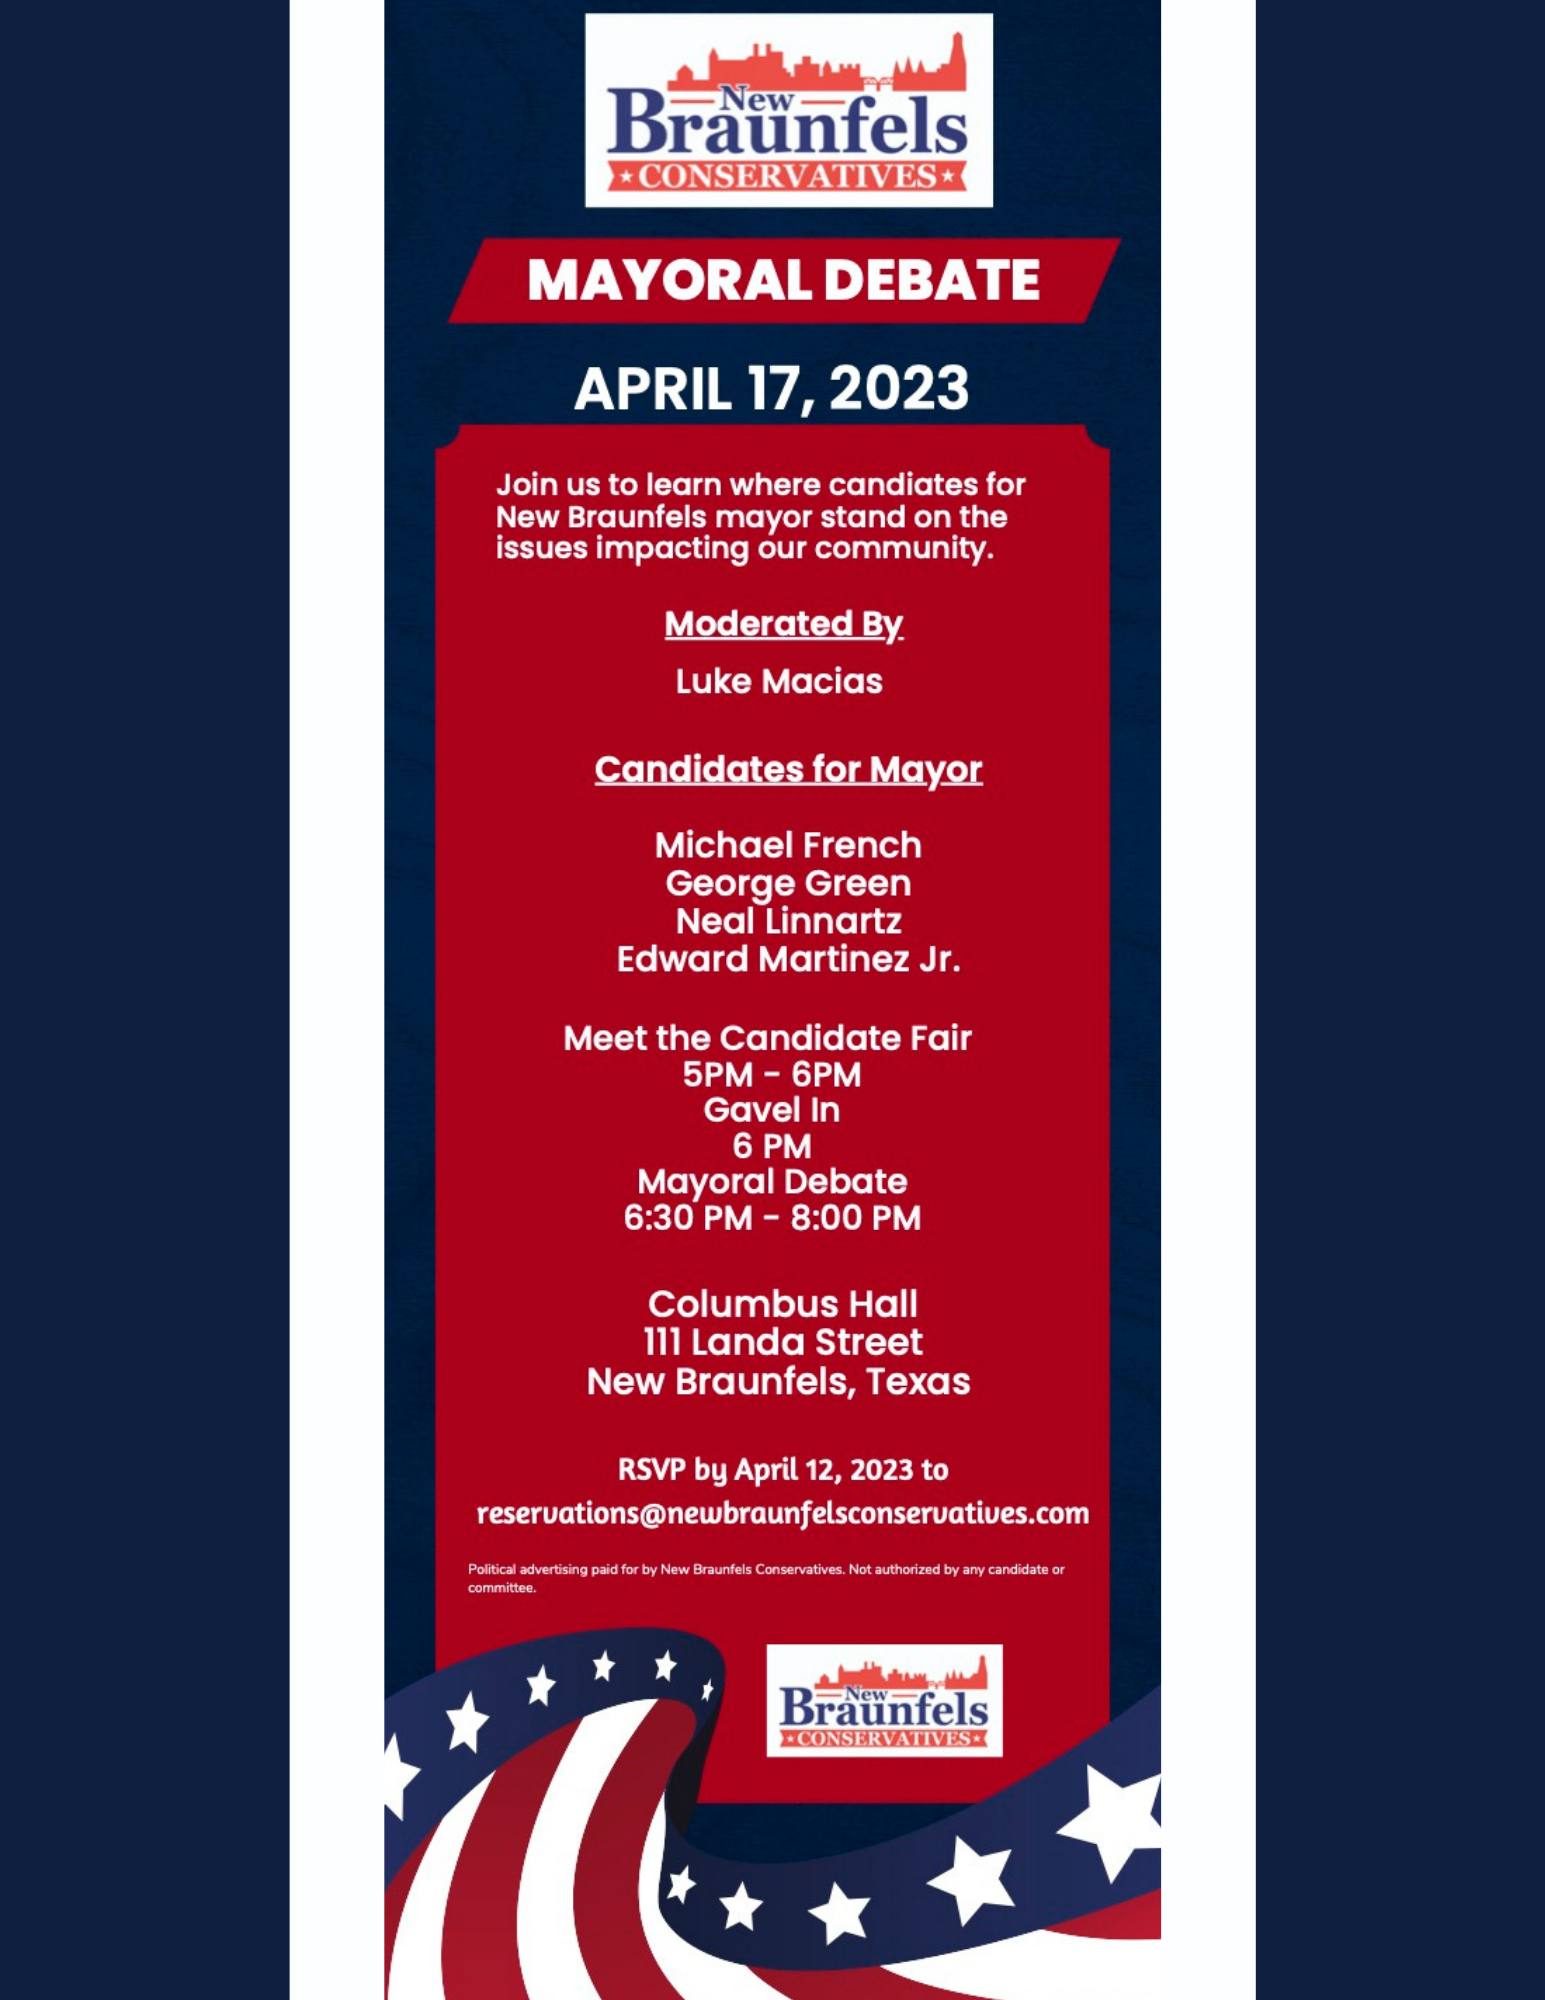 A flyer for the mayoral debate with information about candidates.